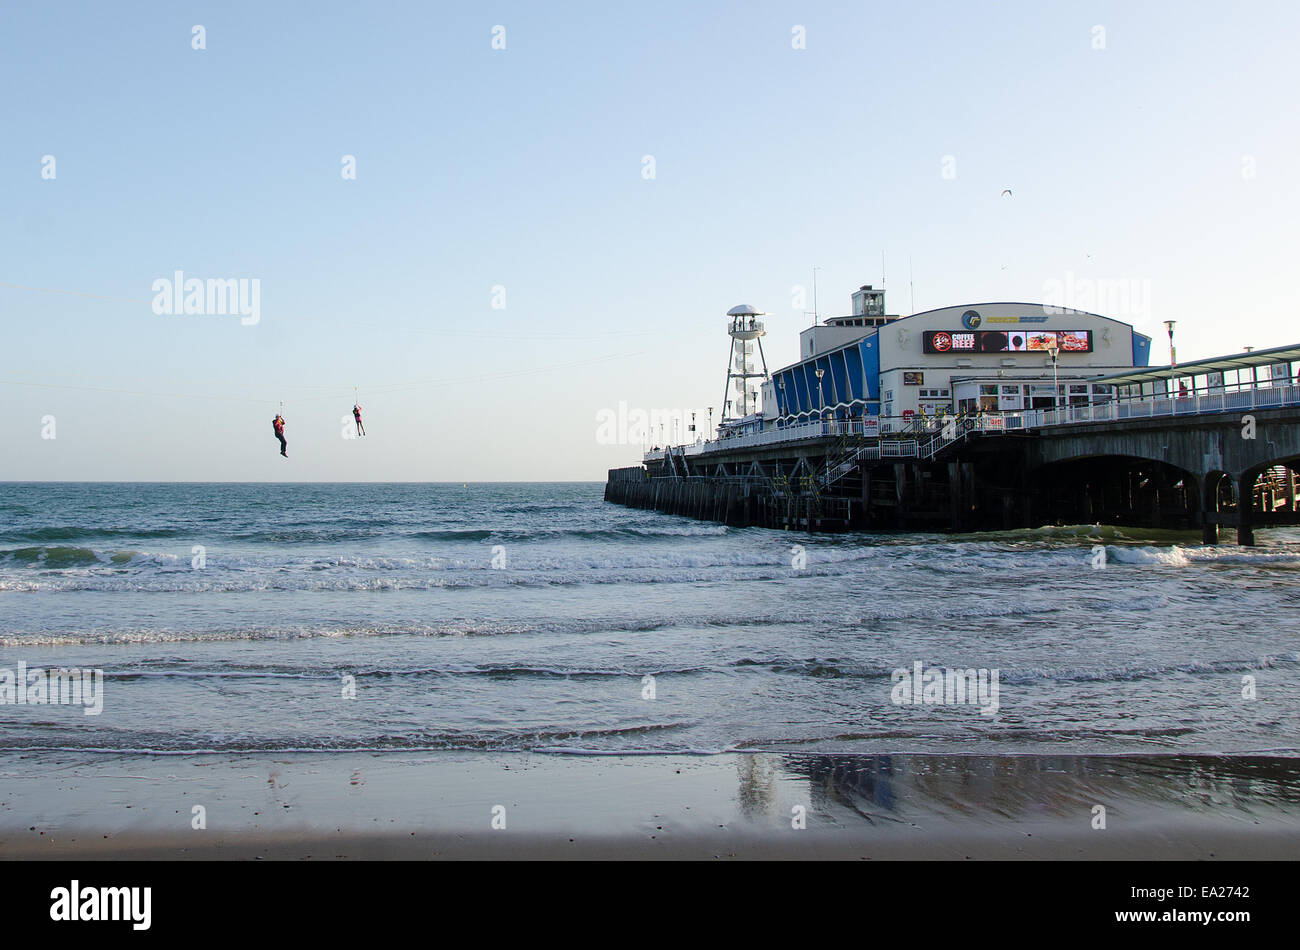 The PierZip, the first pier to beach zip wire in the world, opened in Bournemouth in September 2014. Stock Photo